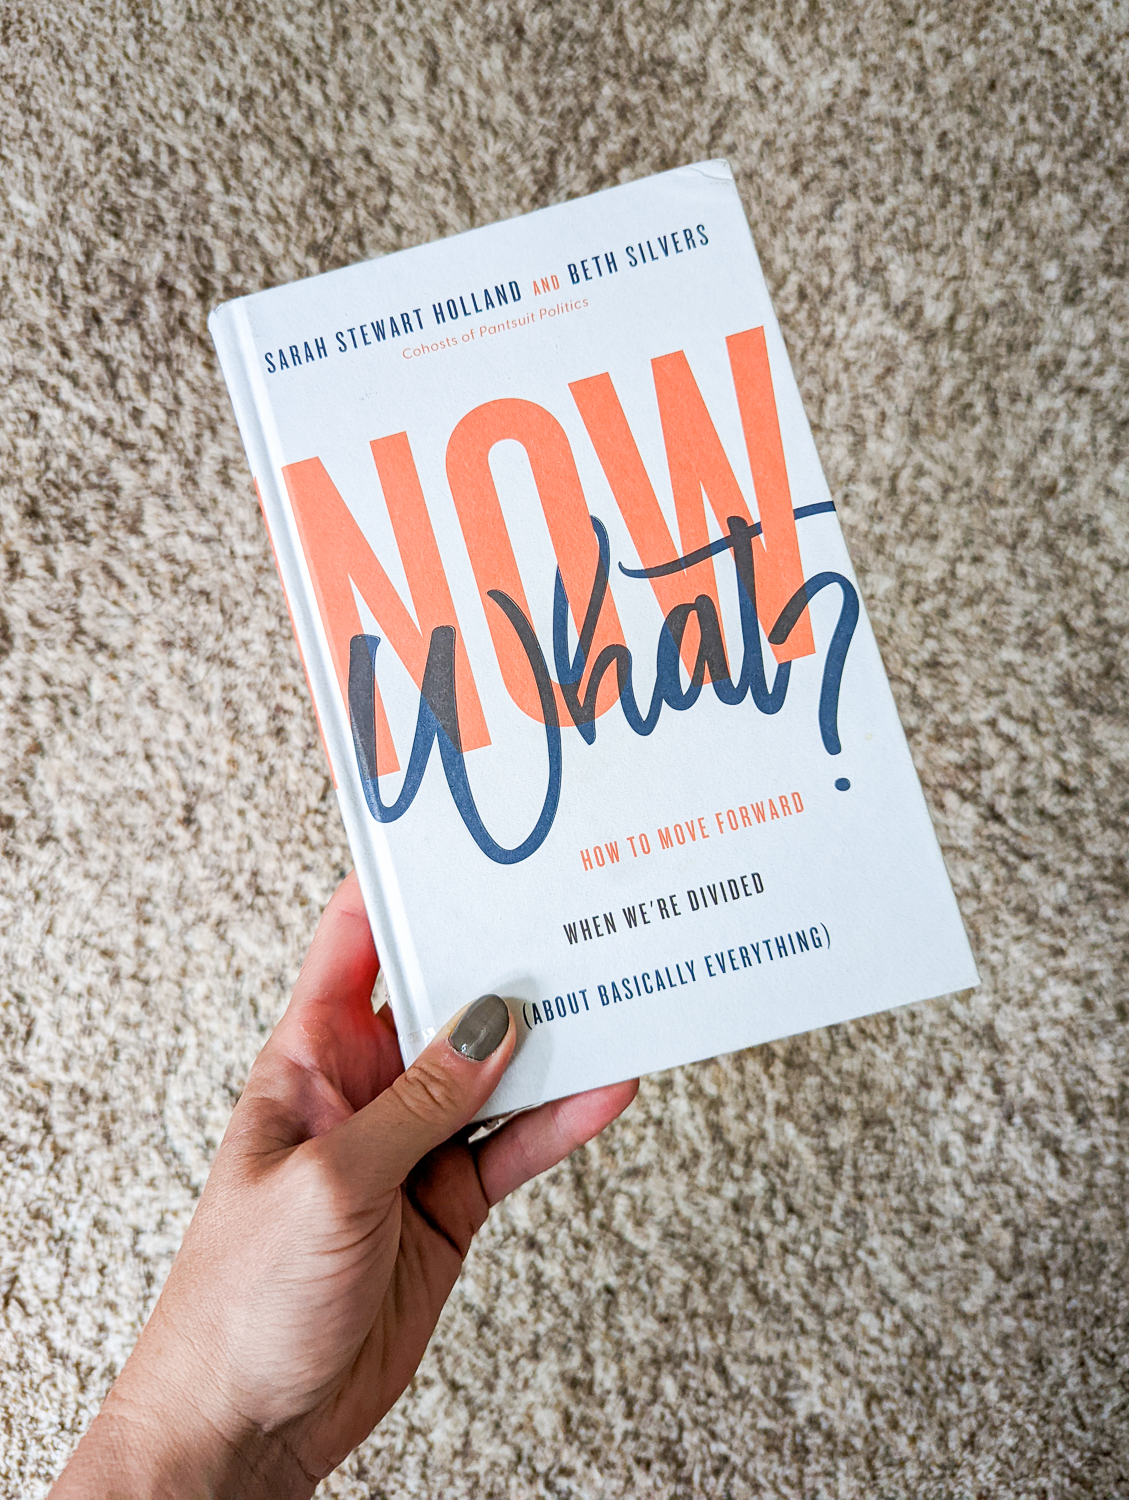 Book Review of Now What? How To Move Forward When We’re Divided (About Basically Everything)